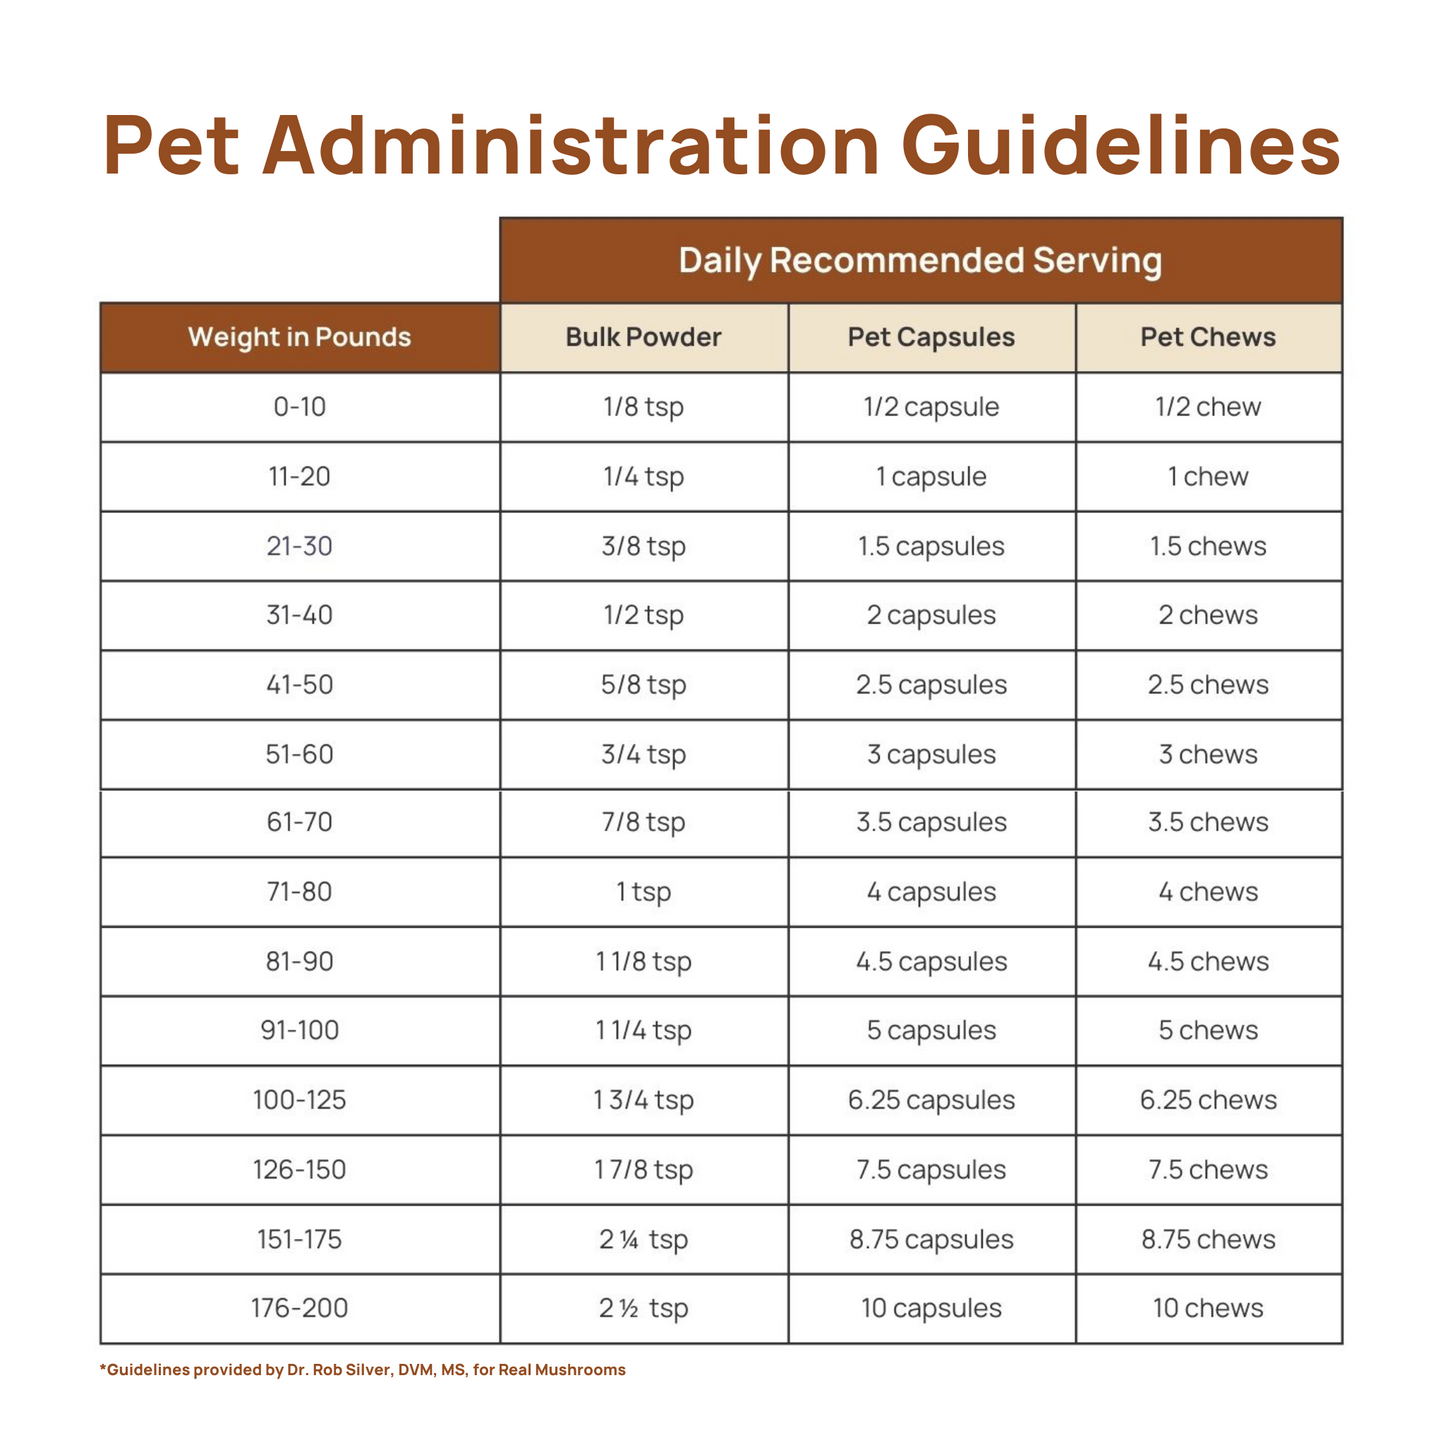 Organic pet administration guidelines for Real Mushrooms' Organic Cordyceps Mushroom Extract Powder for Pets.